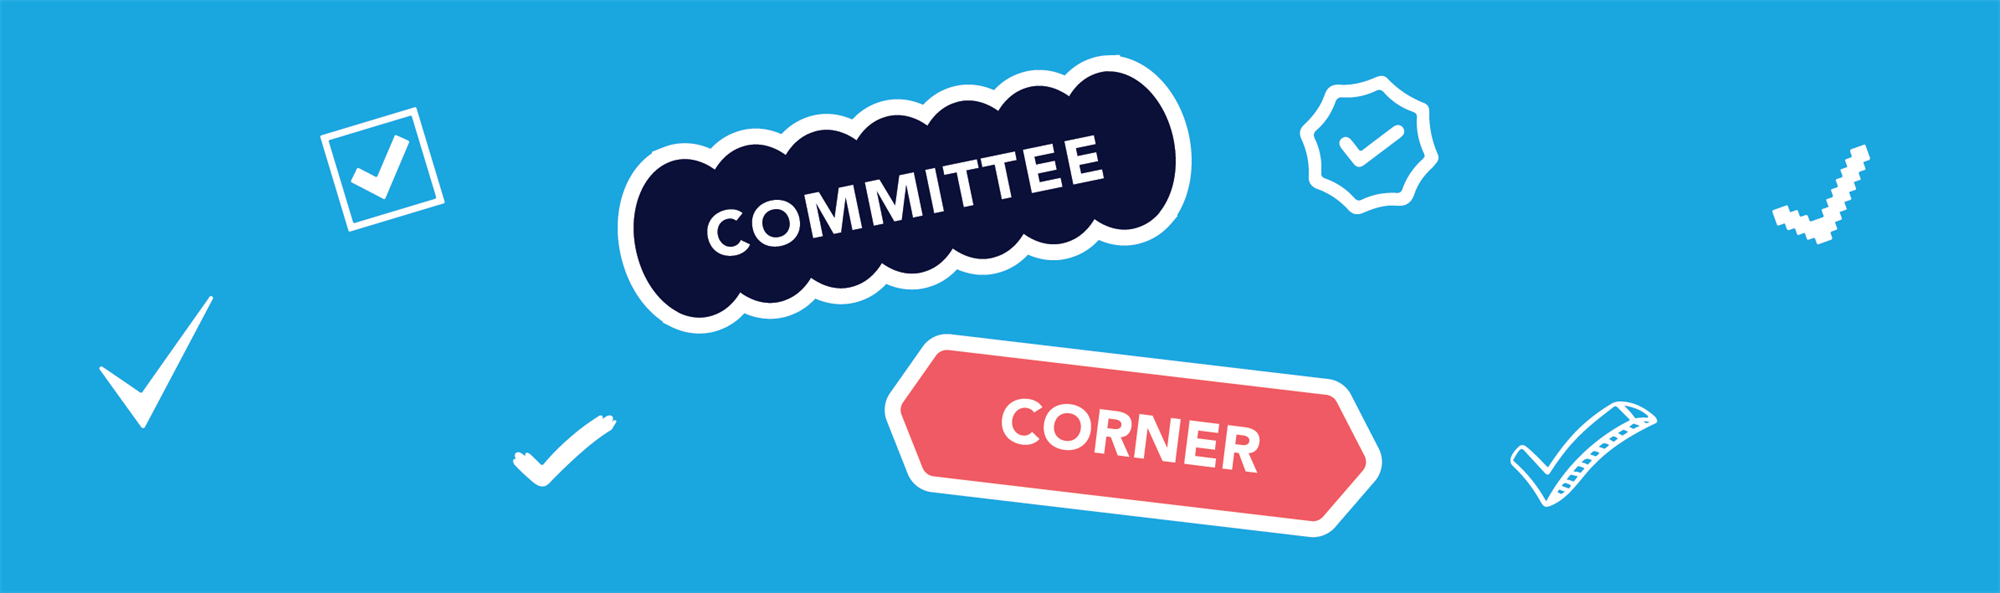 All the information and forms for committees to run a successful club